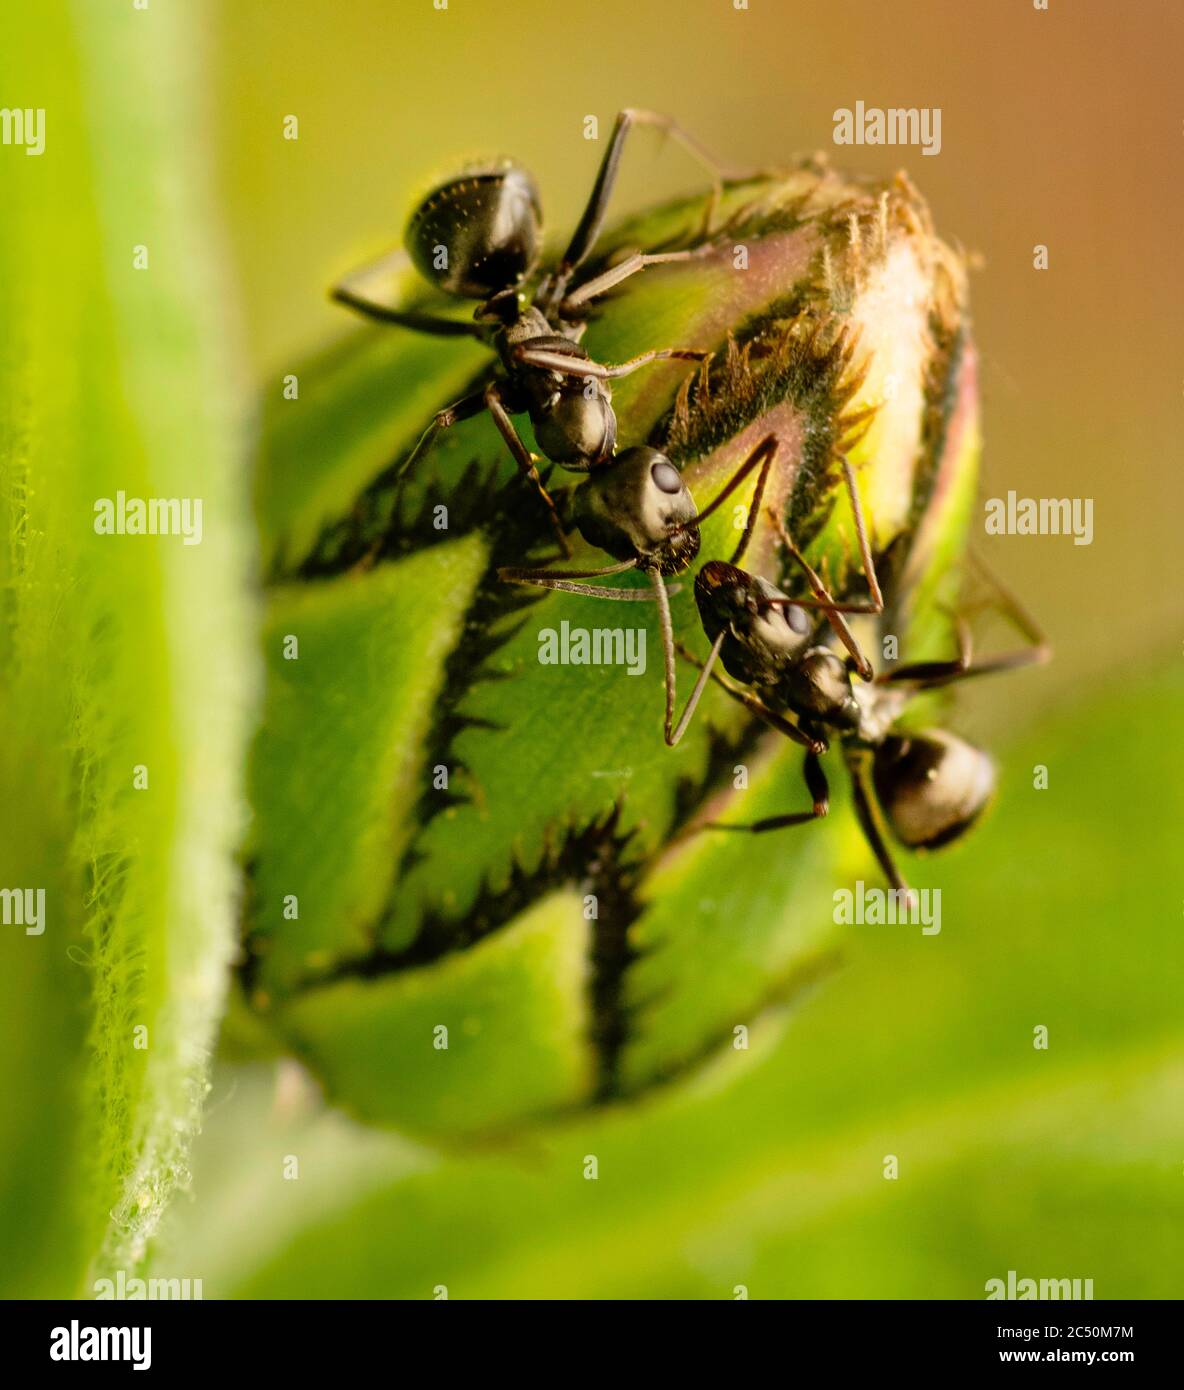 Little Black Ants Feed on Bachelor Button Flower Blossom Stock Photo